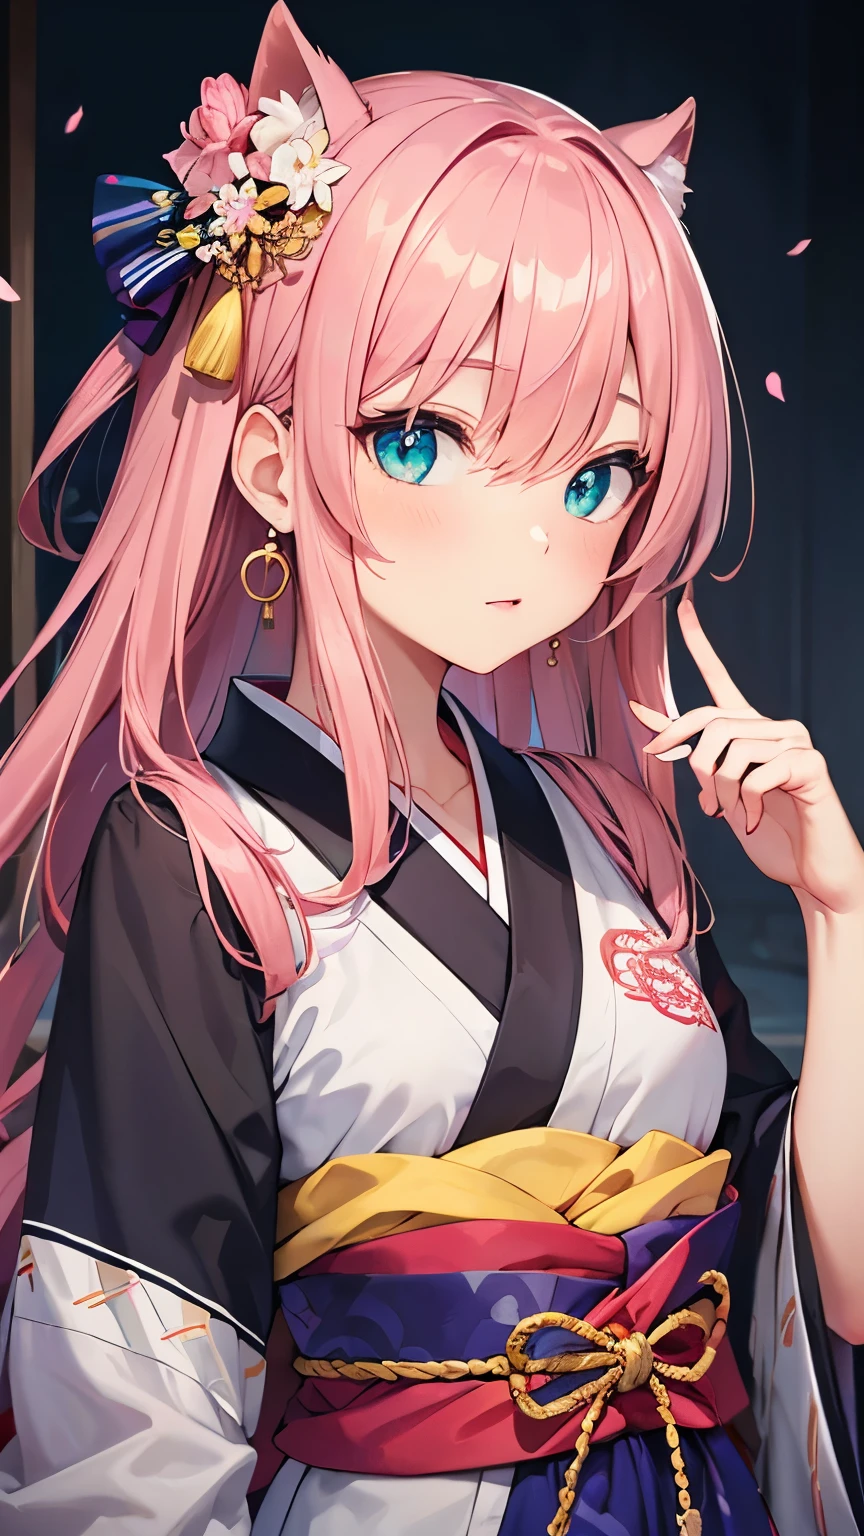 pink hair, bangs, long hair, hair over eyes, kanzashi, aqua eyes, pensive, anime style, UHD, masterpiece, textured skin, highres, best quality, Fictional ancient Chinese princess, fantasy anime, pearl earrings, cute girl, embroidered kimono